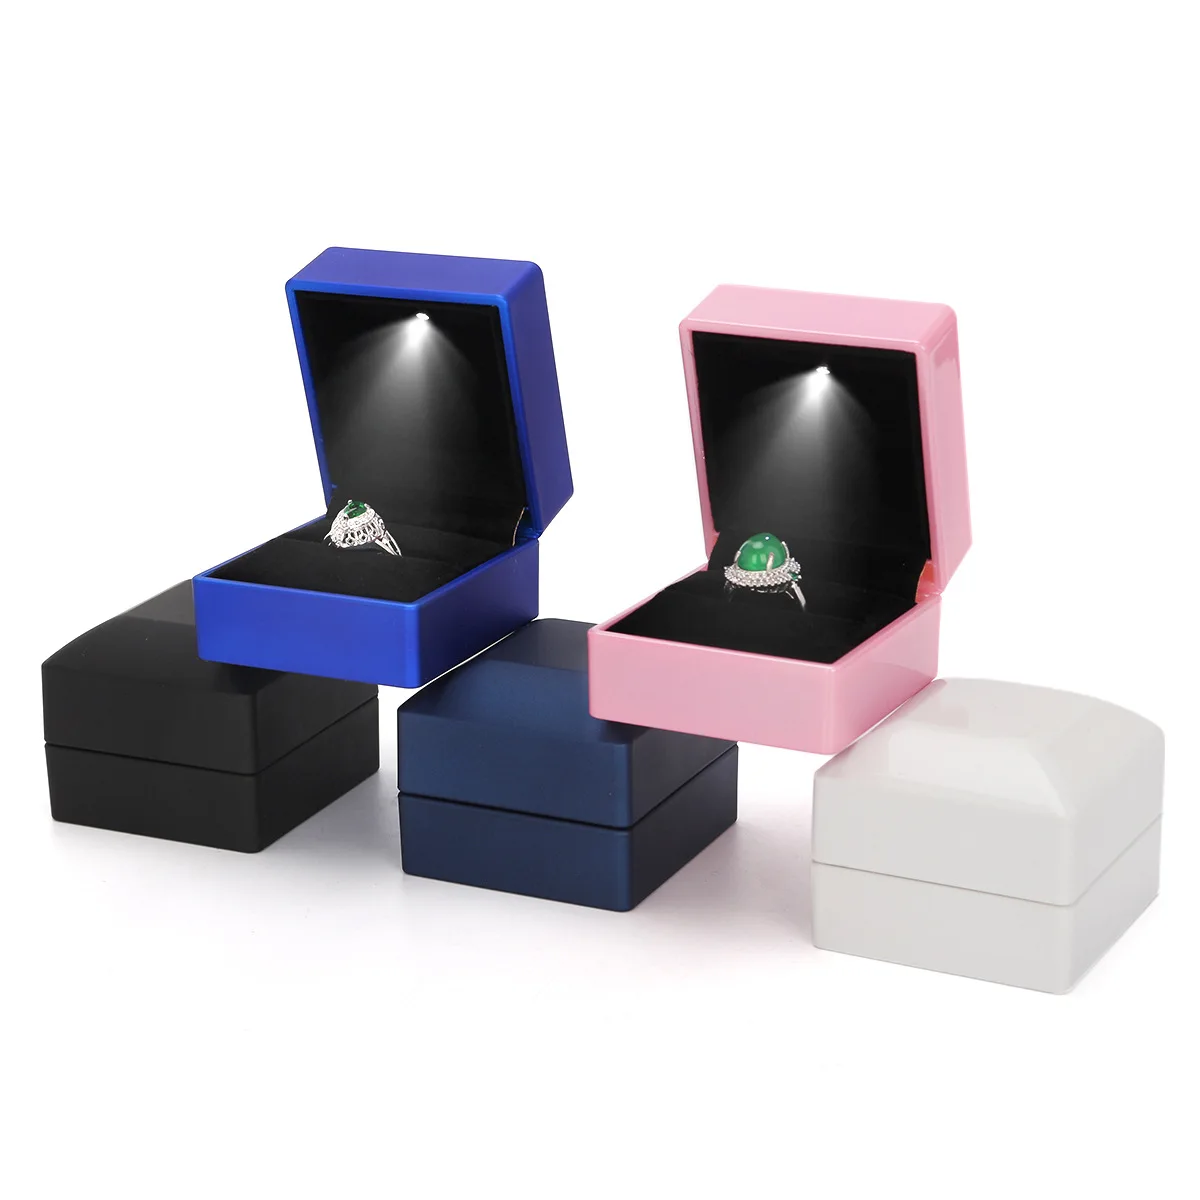 Wholesale Price LED Lighted Earring Ring Gift Box Weeding Engagement Ring Jewelry Dispaly factory price 200pcs lot sublimation blank metal key chain key ring for sublimation ink transfer printing diy gifts